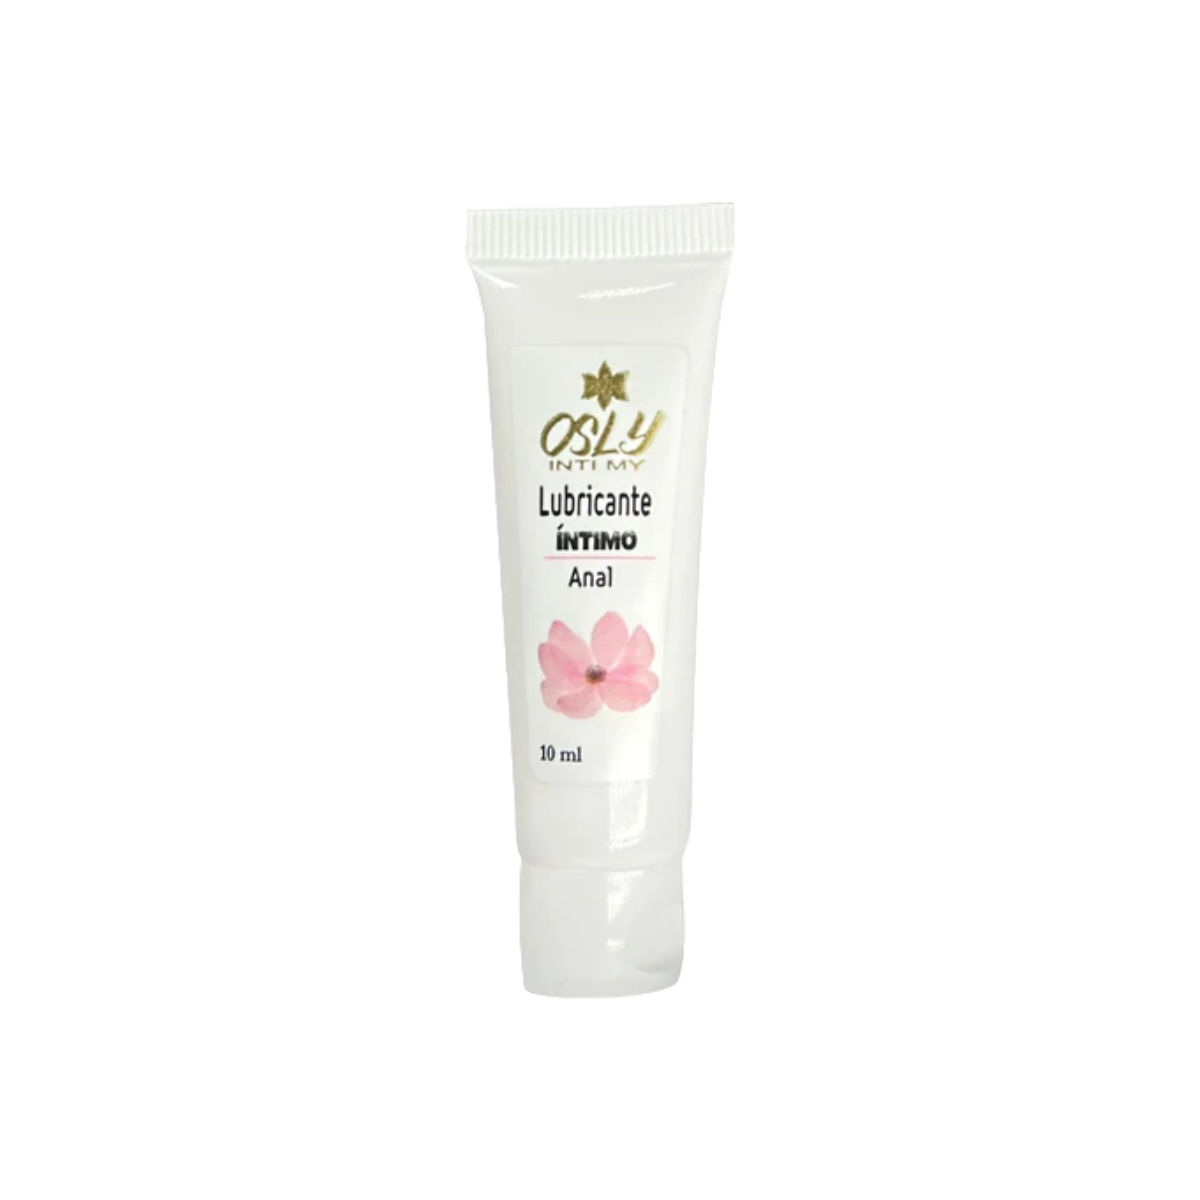 Lubricante Intimo Anal Osly X 10ml